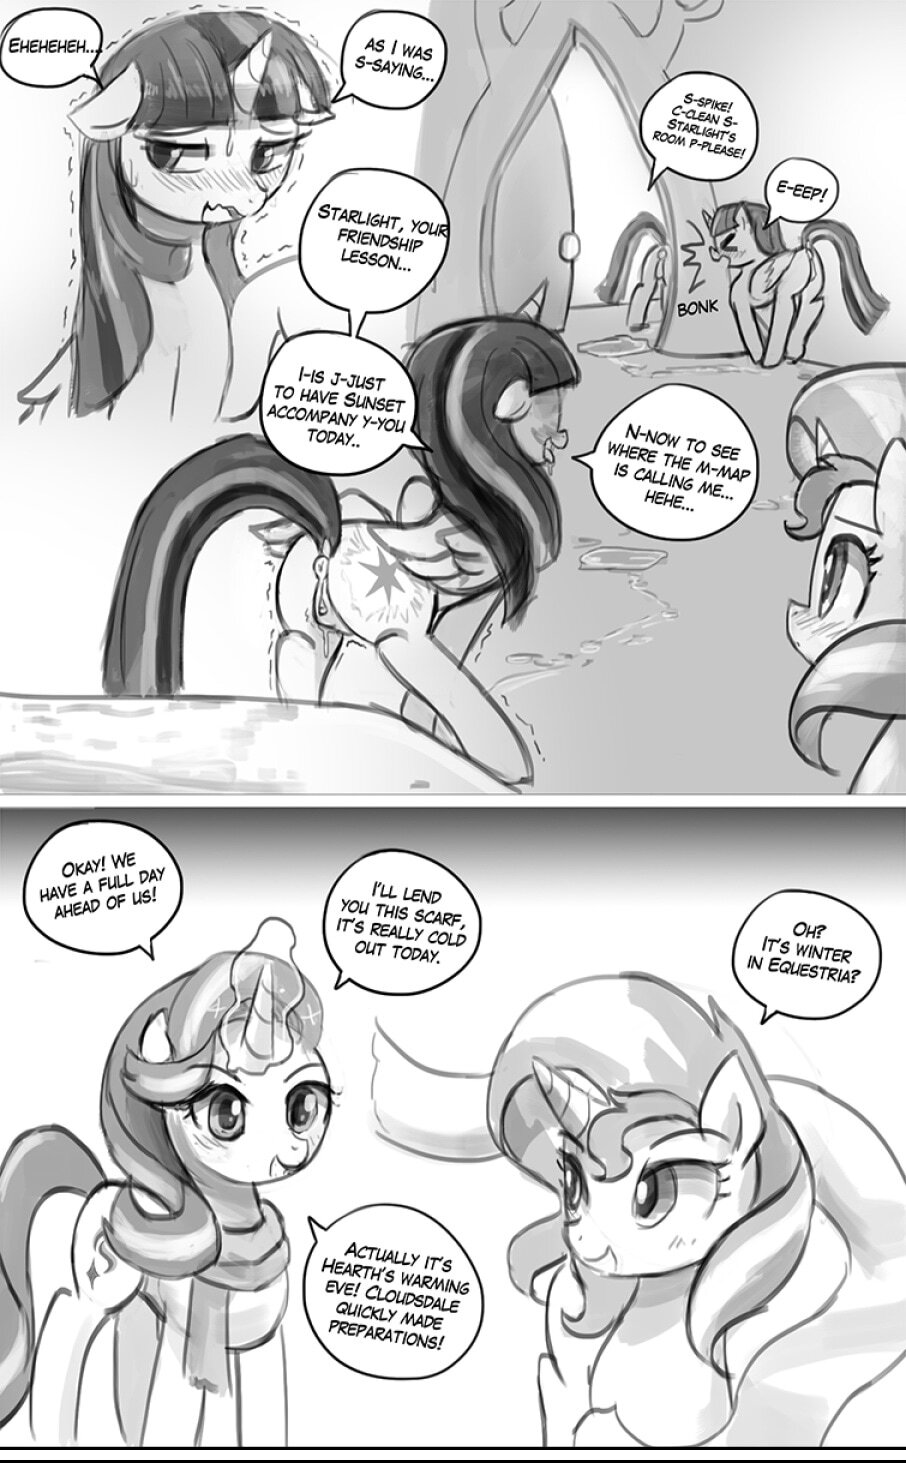 Homesick Part 2: Hearth's Warming Eve - Page 7